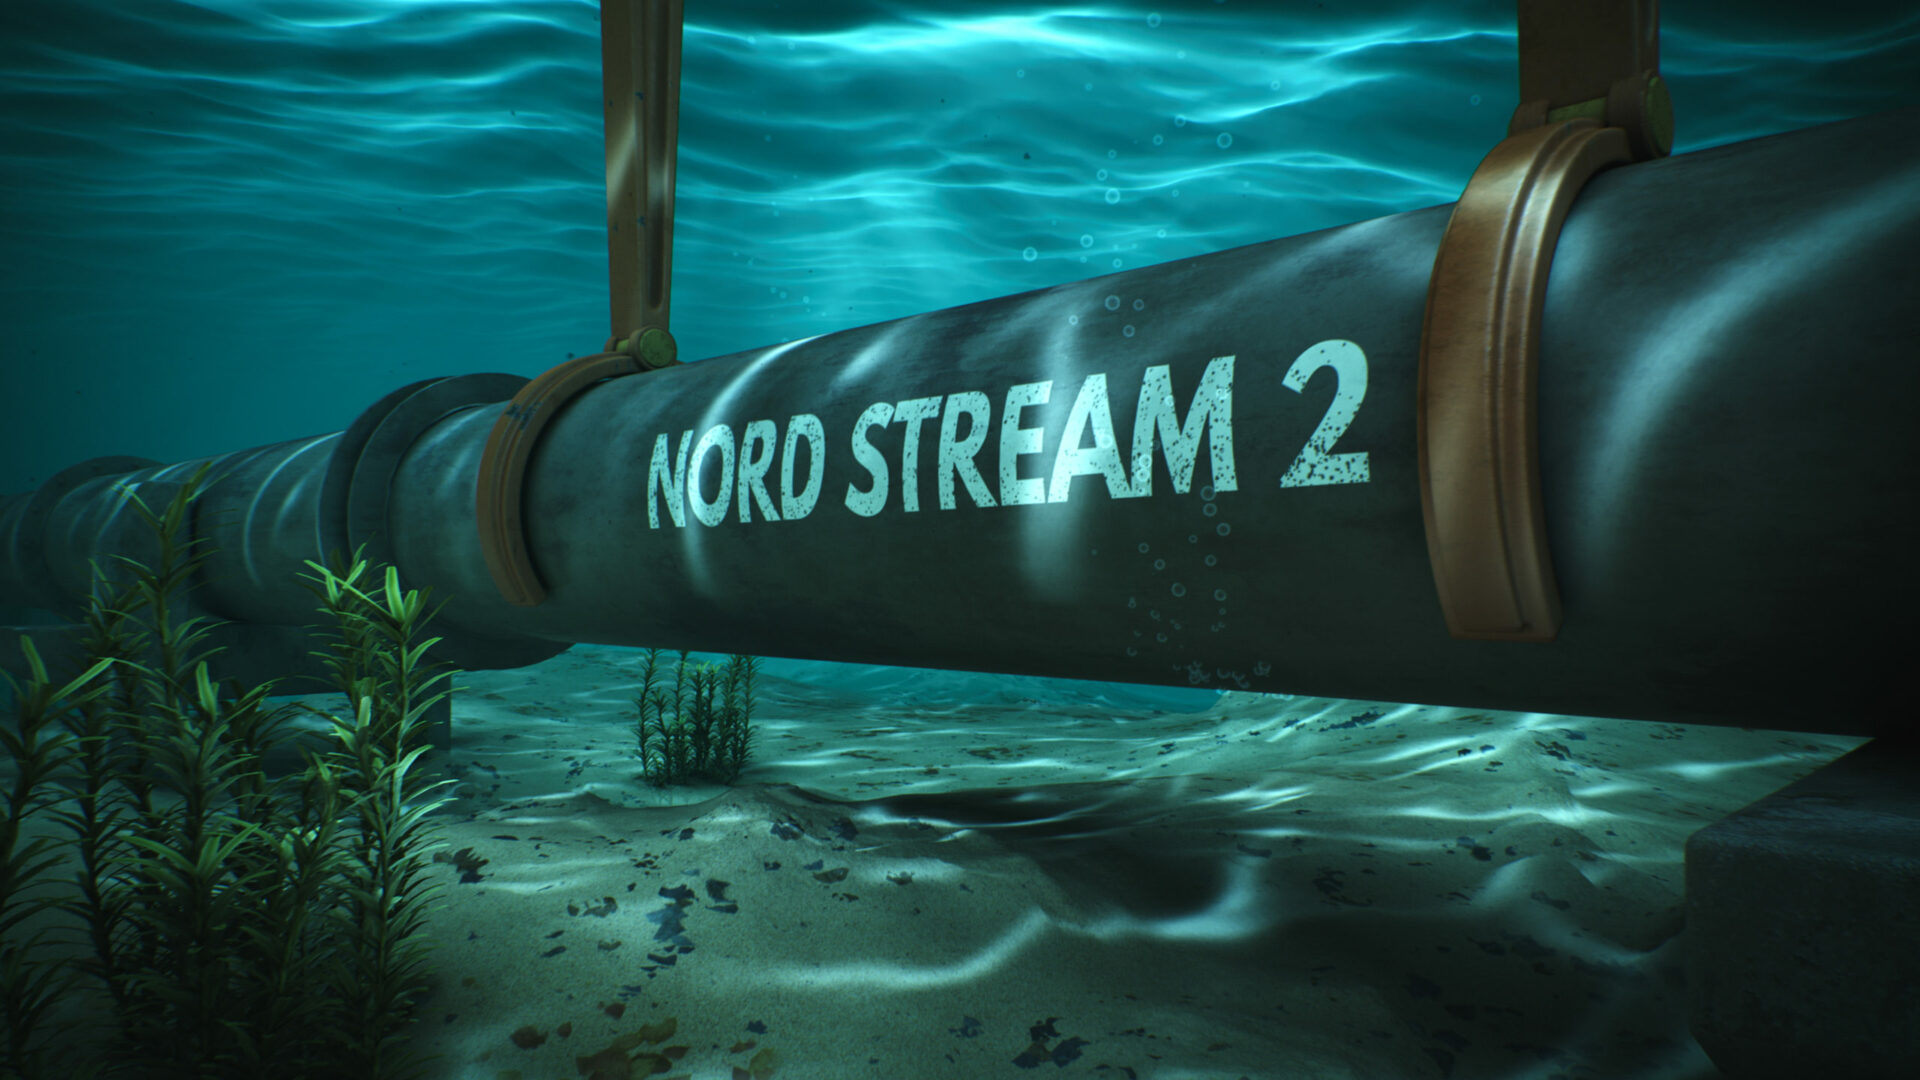 LE PROJET NORD STREAM 2